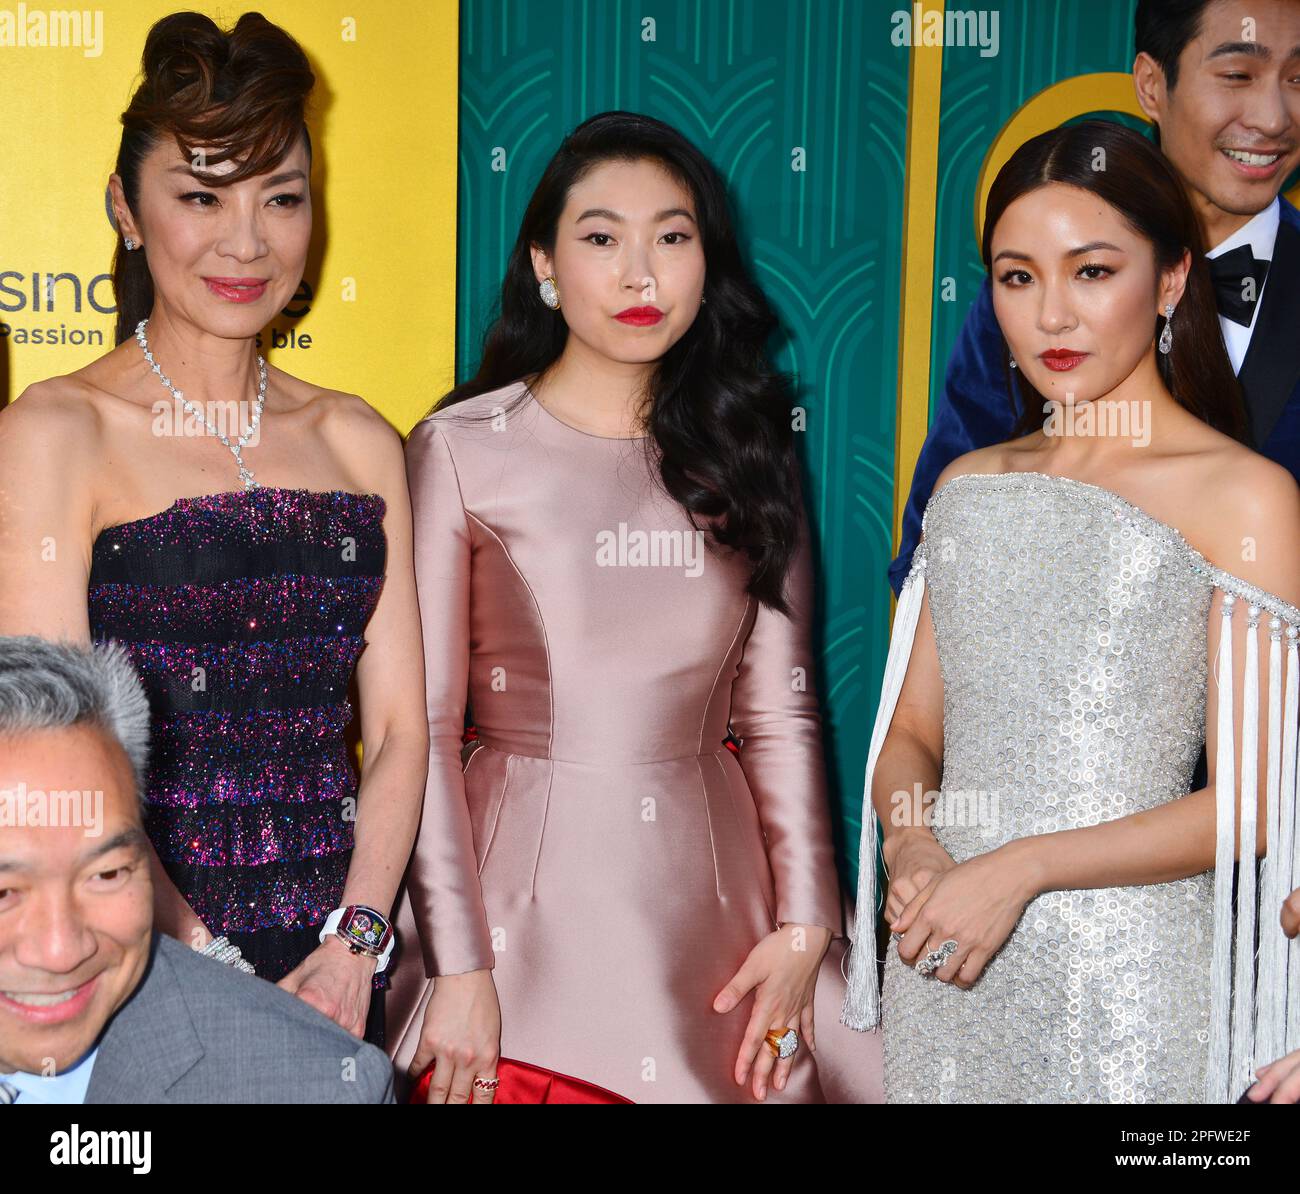 Michelle Yeoh, Awkwafina, Constance Wu 137 arrives at the Warner Bros. Pictures' 'Crazy Rich Asians' premiere at the TCL Chinese Theatre IMAX on August 7, 2018 in HollywoodRichard Belzer, Comedian and Law & Order- SVU Mainstay, Dead at 78    © Tsuni / USA Michelle Yeoh, Awkwafina, Constance Wu 137 Stock Photo